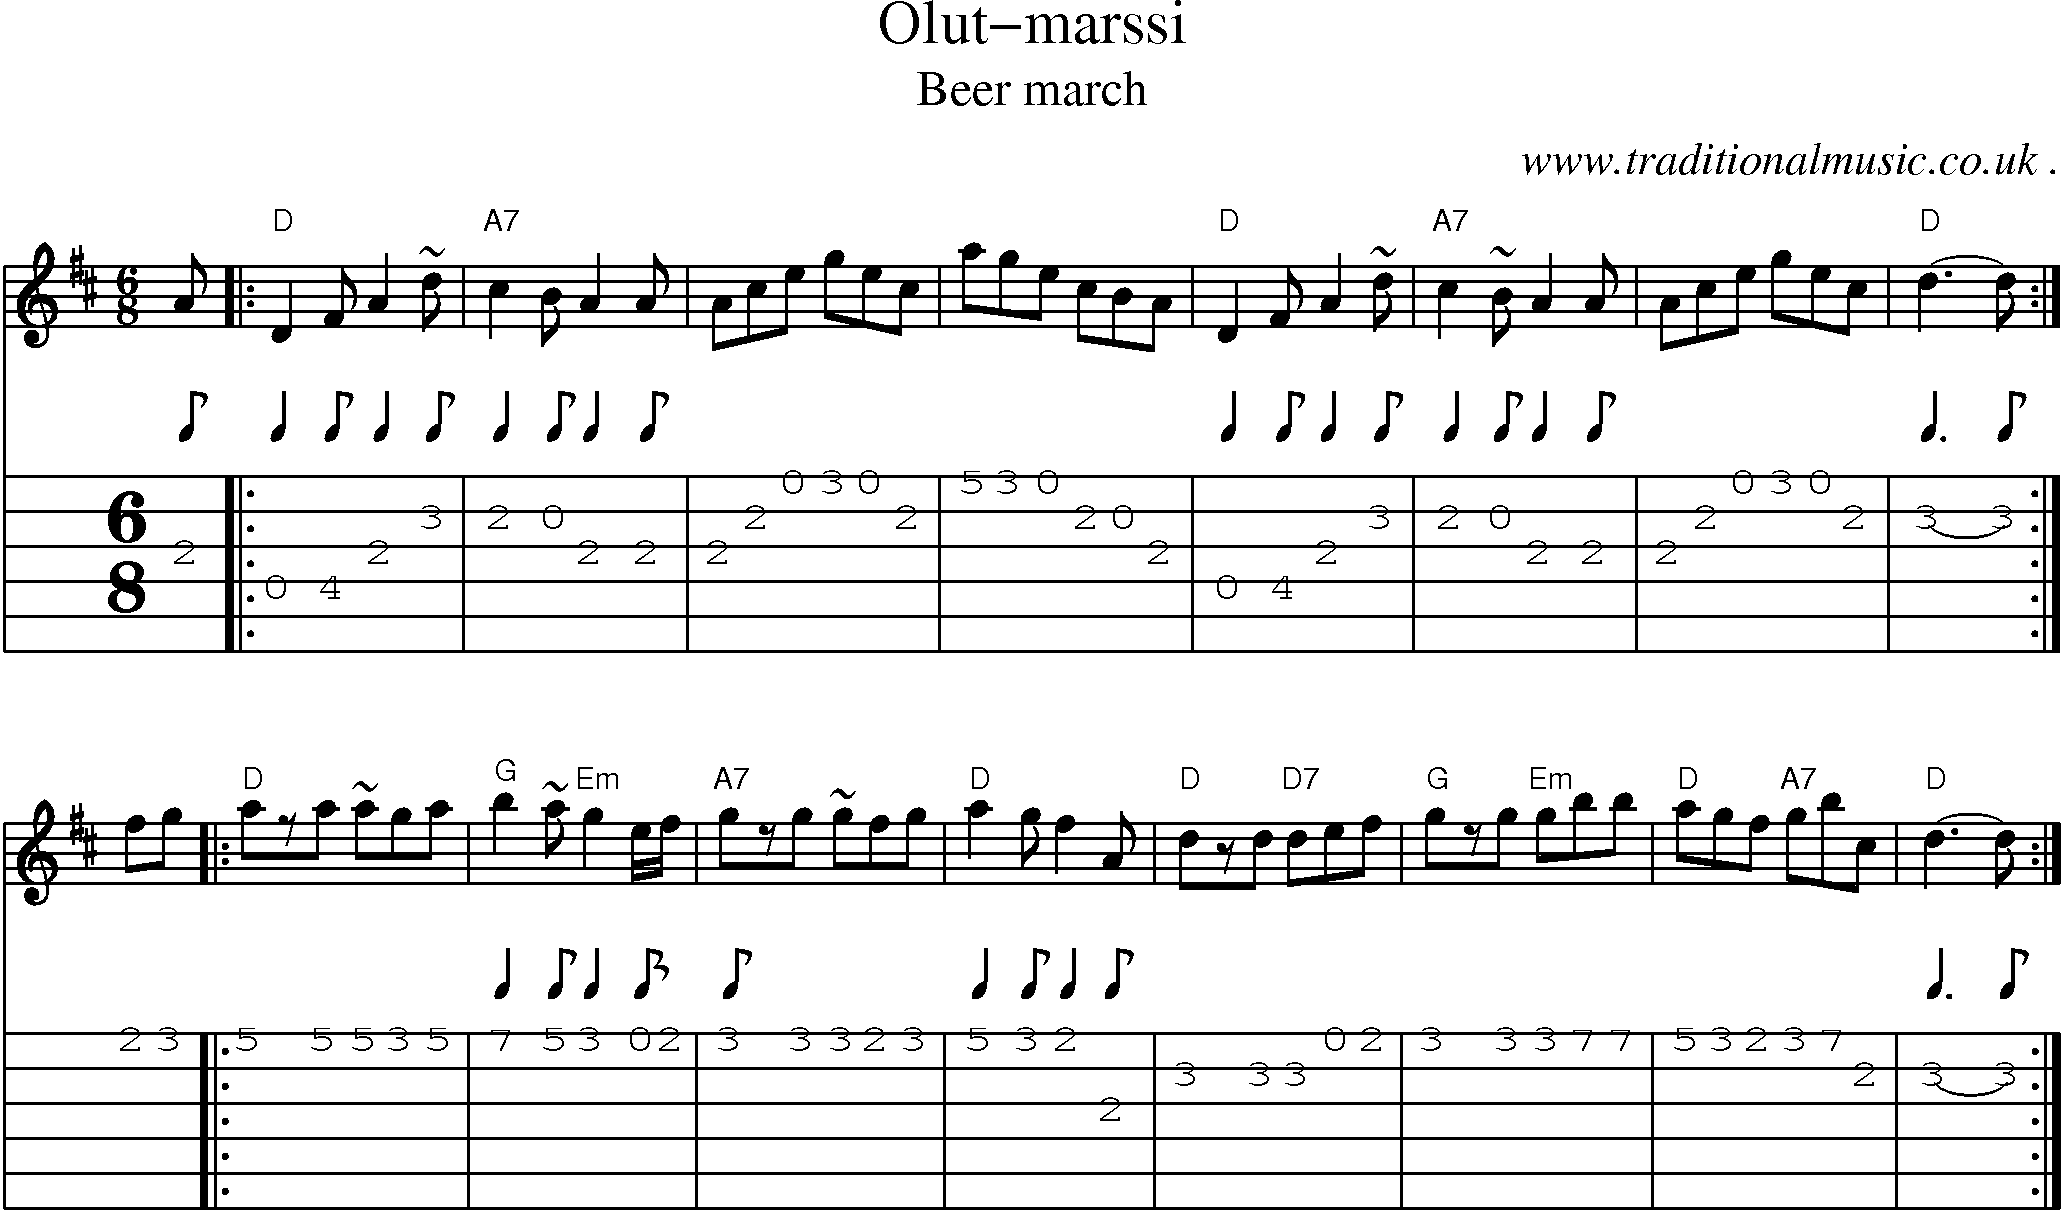 Sheet-music  score, Chords and Guitar Tabs for Olut-marssi